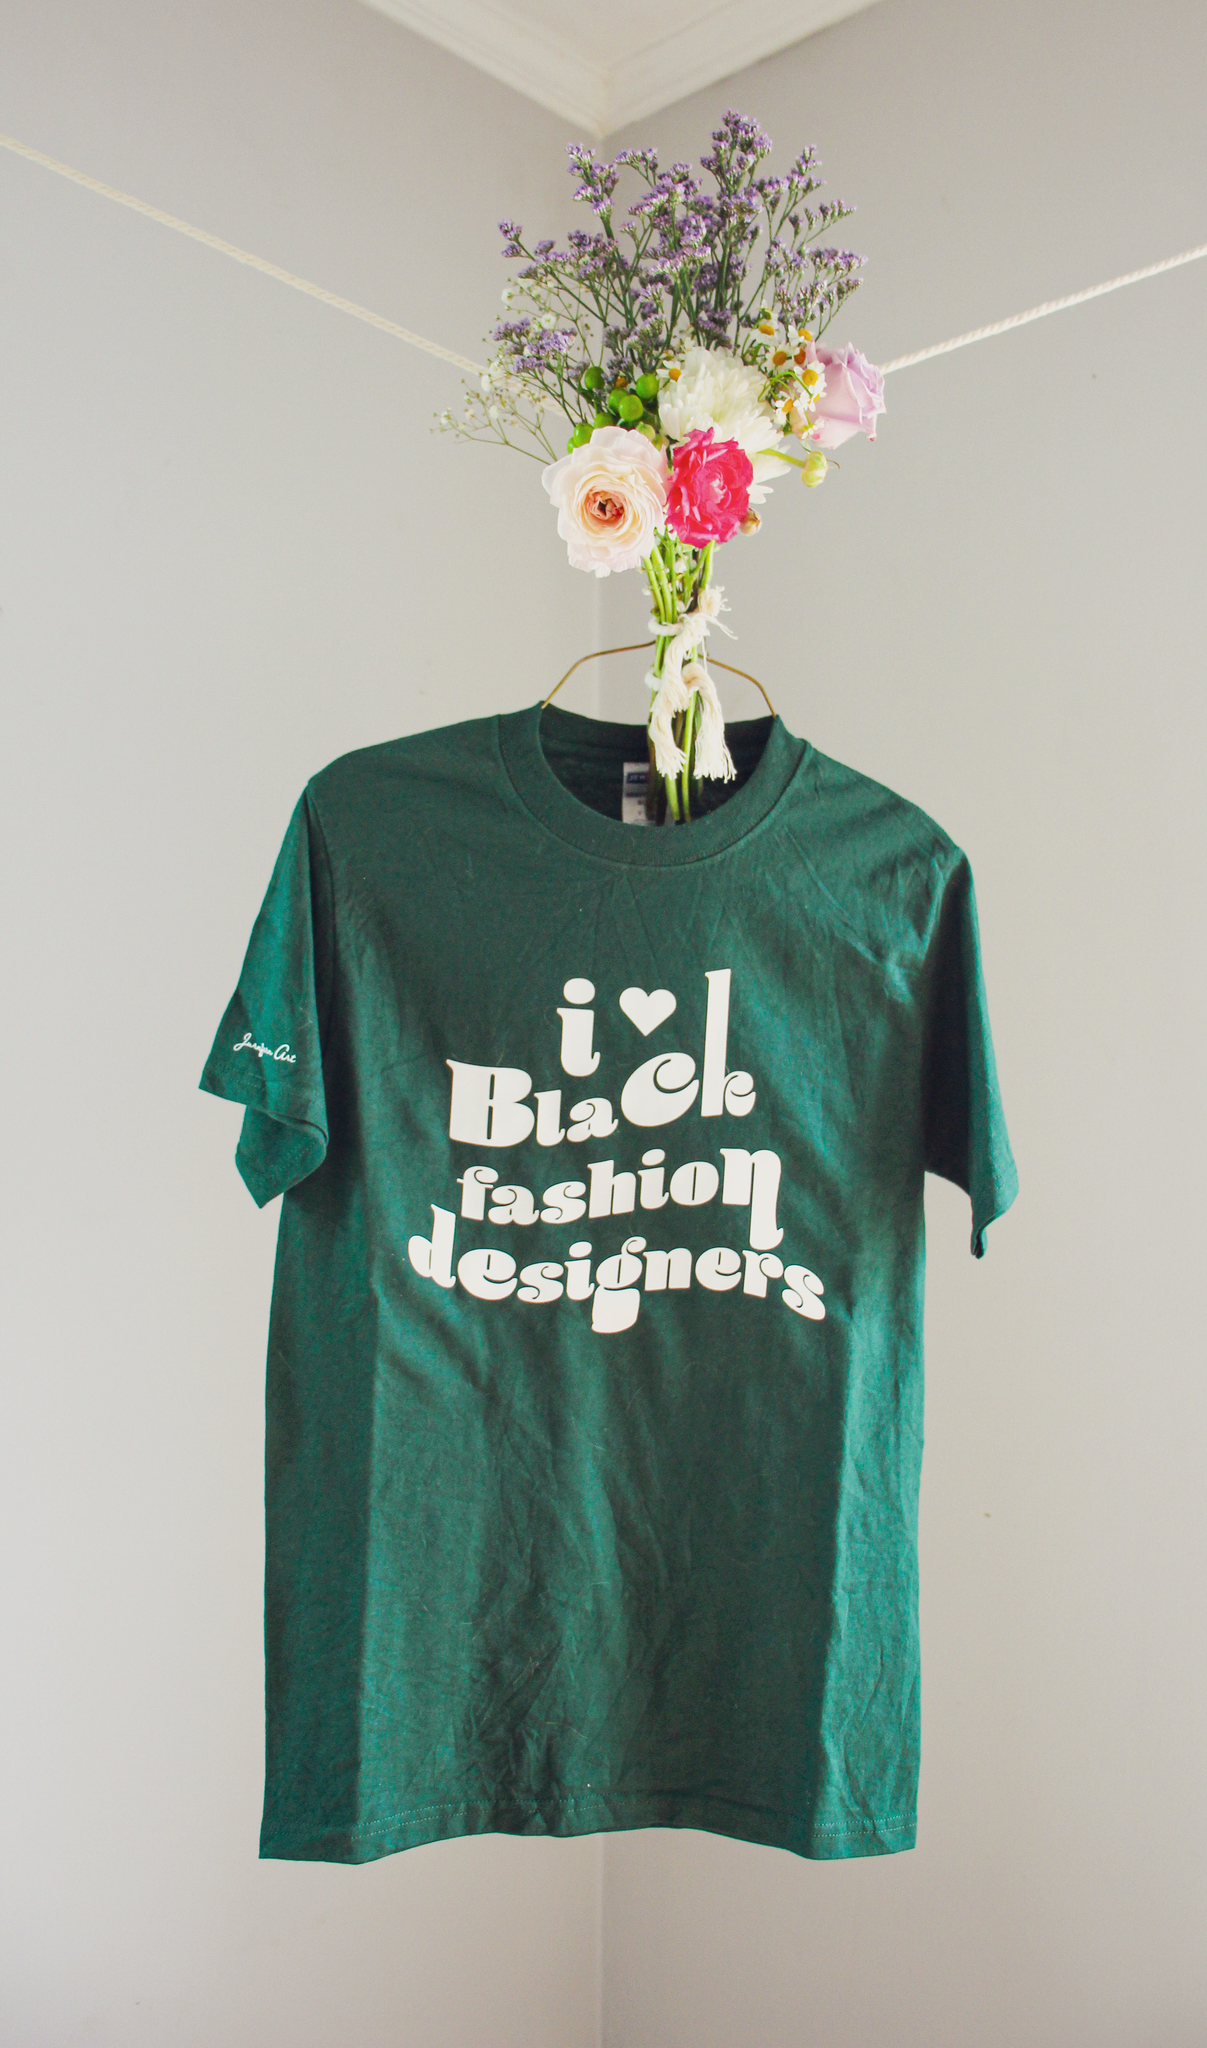 A dark green t-shirt with retro text on it that reads "i love Black fashion designers," hanging on a wire hanger with a bouquet of flowers tied to it